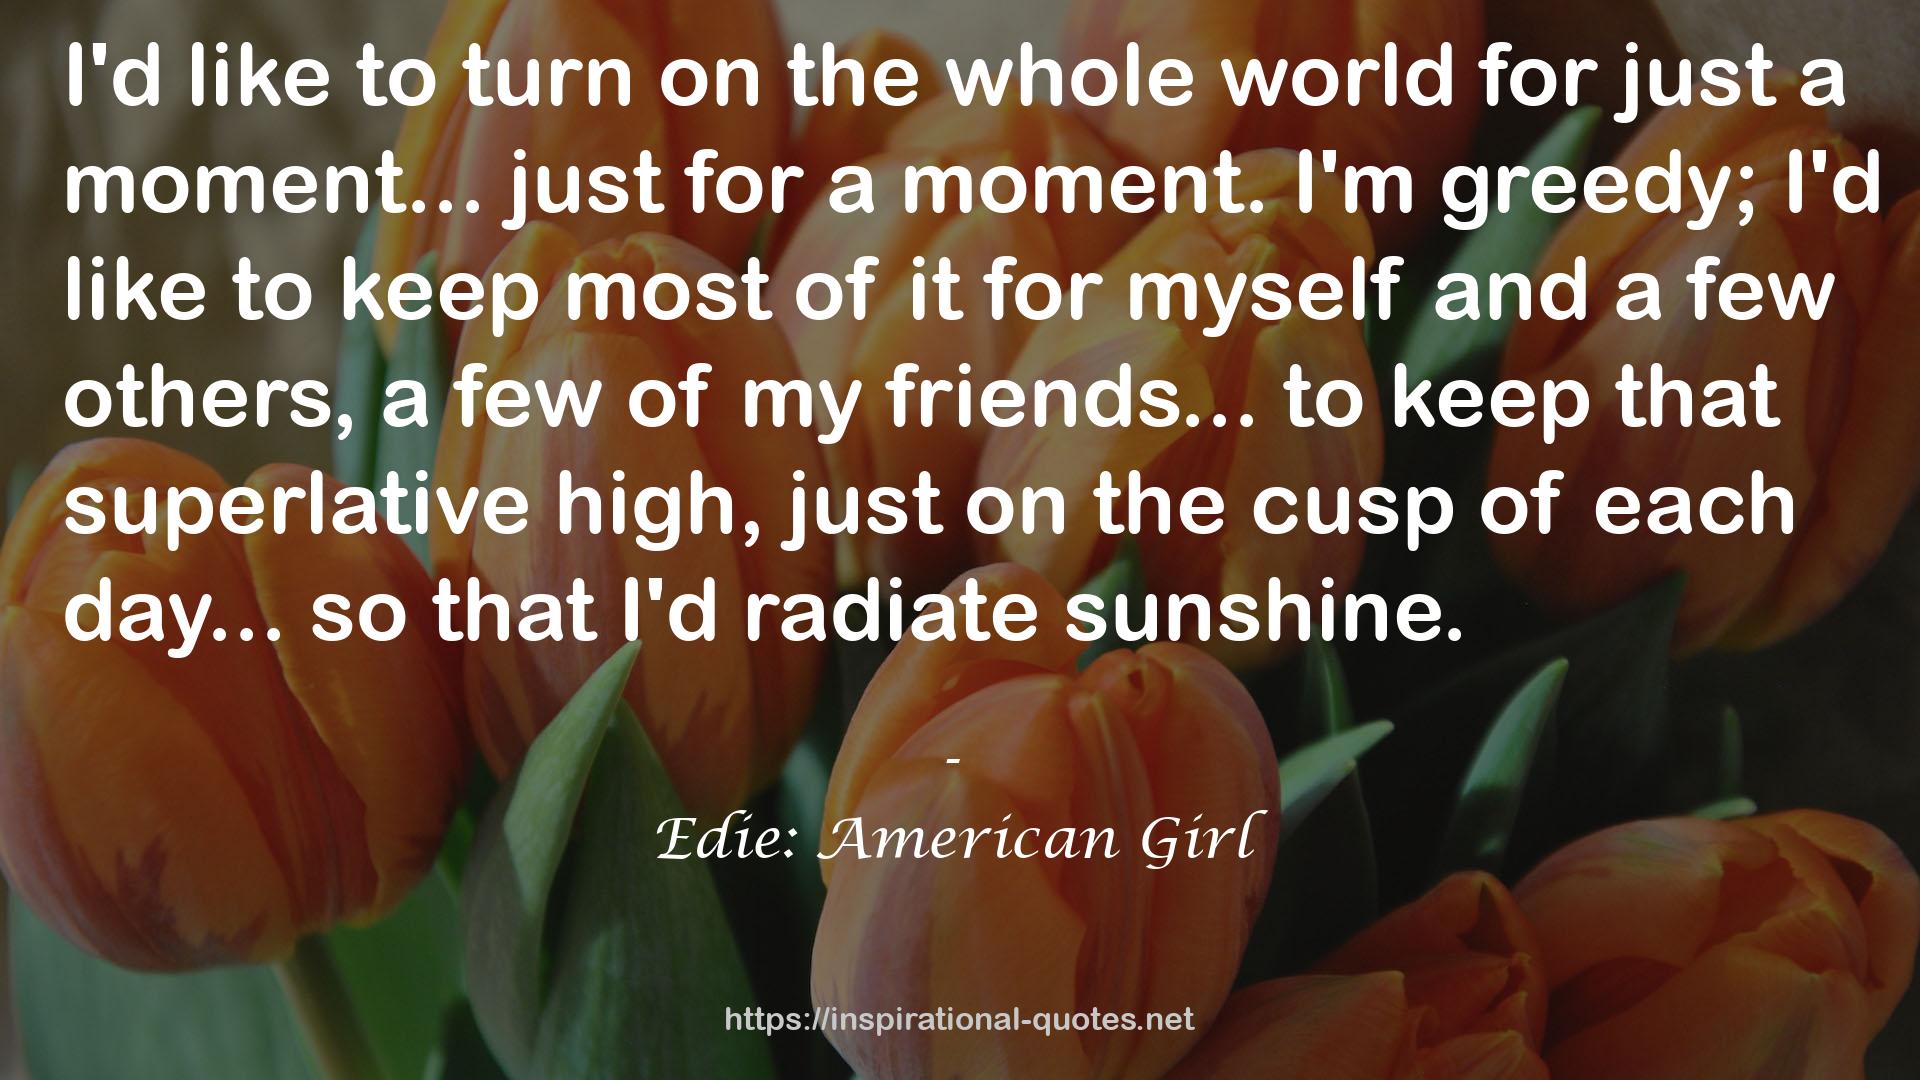  quote : I'd like to turn on the whole world for just a moment... just for a moment. I'm greedy; I'd like to keep most of it for myself and a few others, a few of my friends... to keep that superlative high, just on the cusp of each day... so that I'd radiate sunshine.